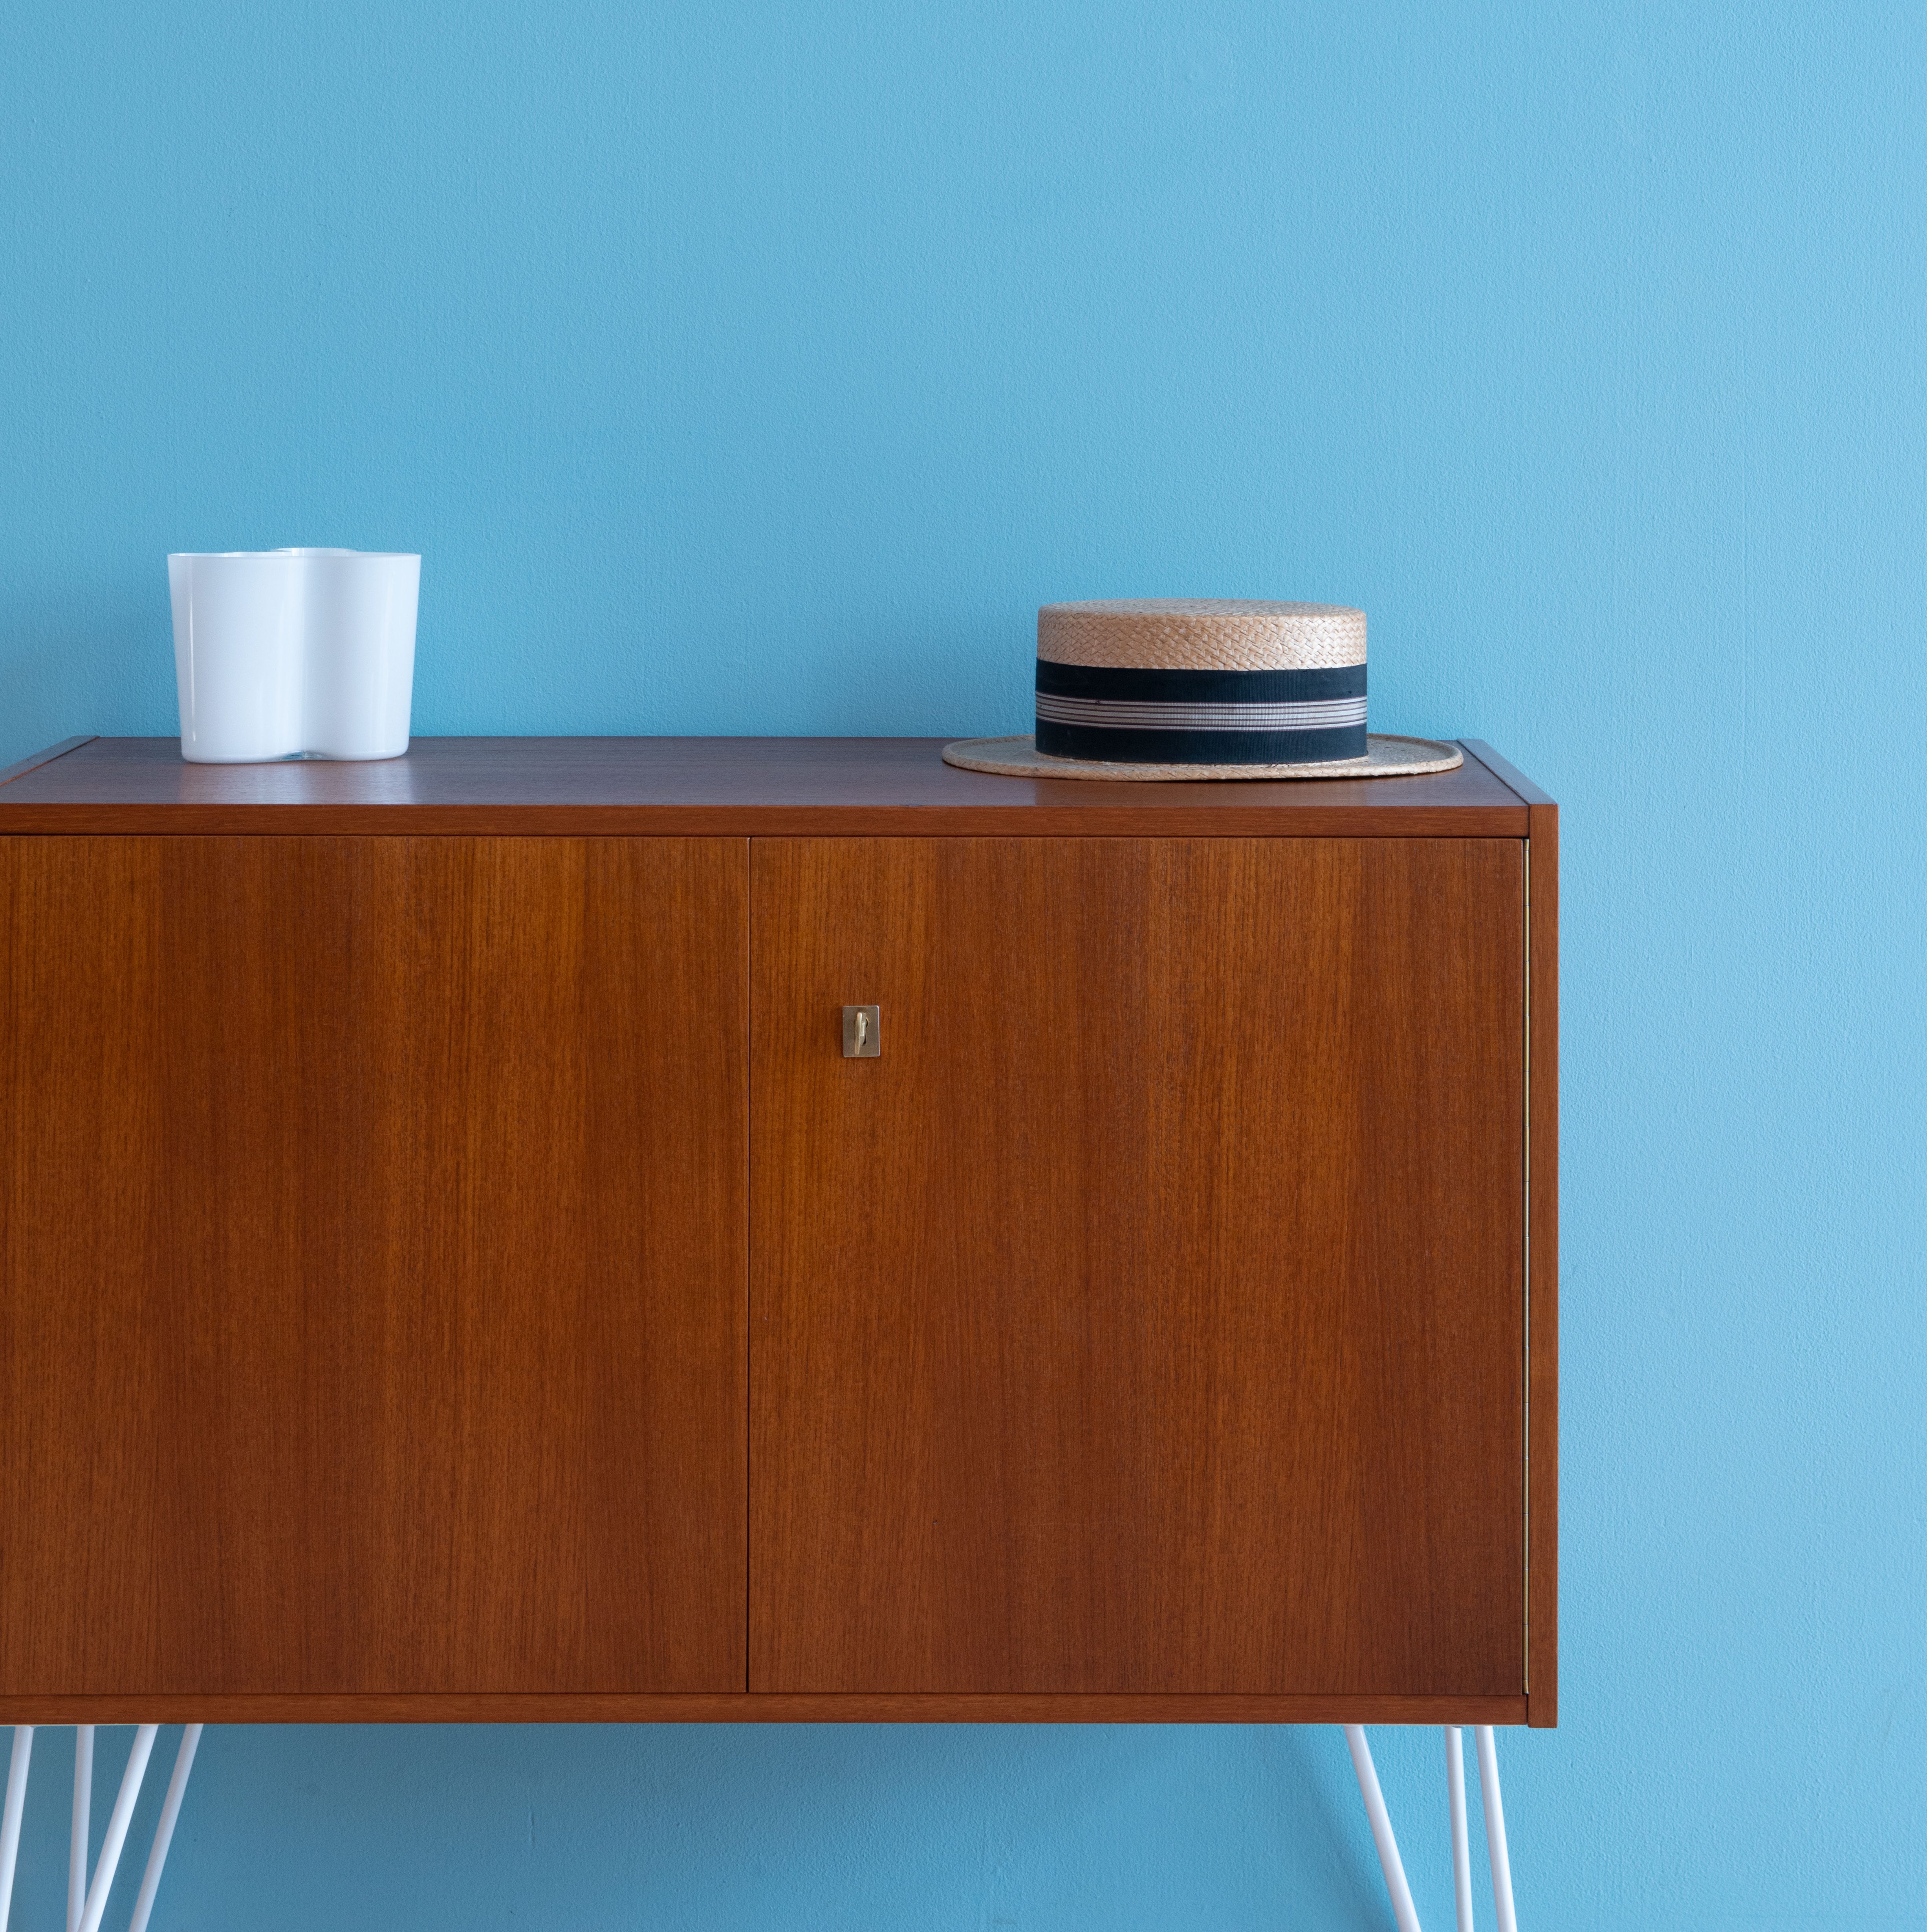 Teak Cabinet with Hairpin Legs Available at heyday möbel.